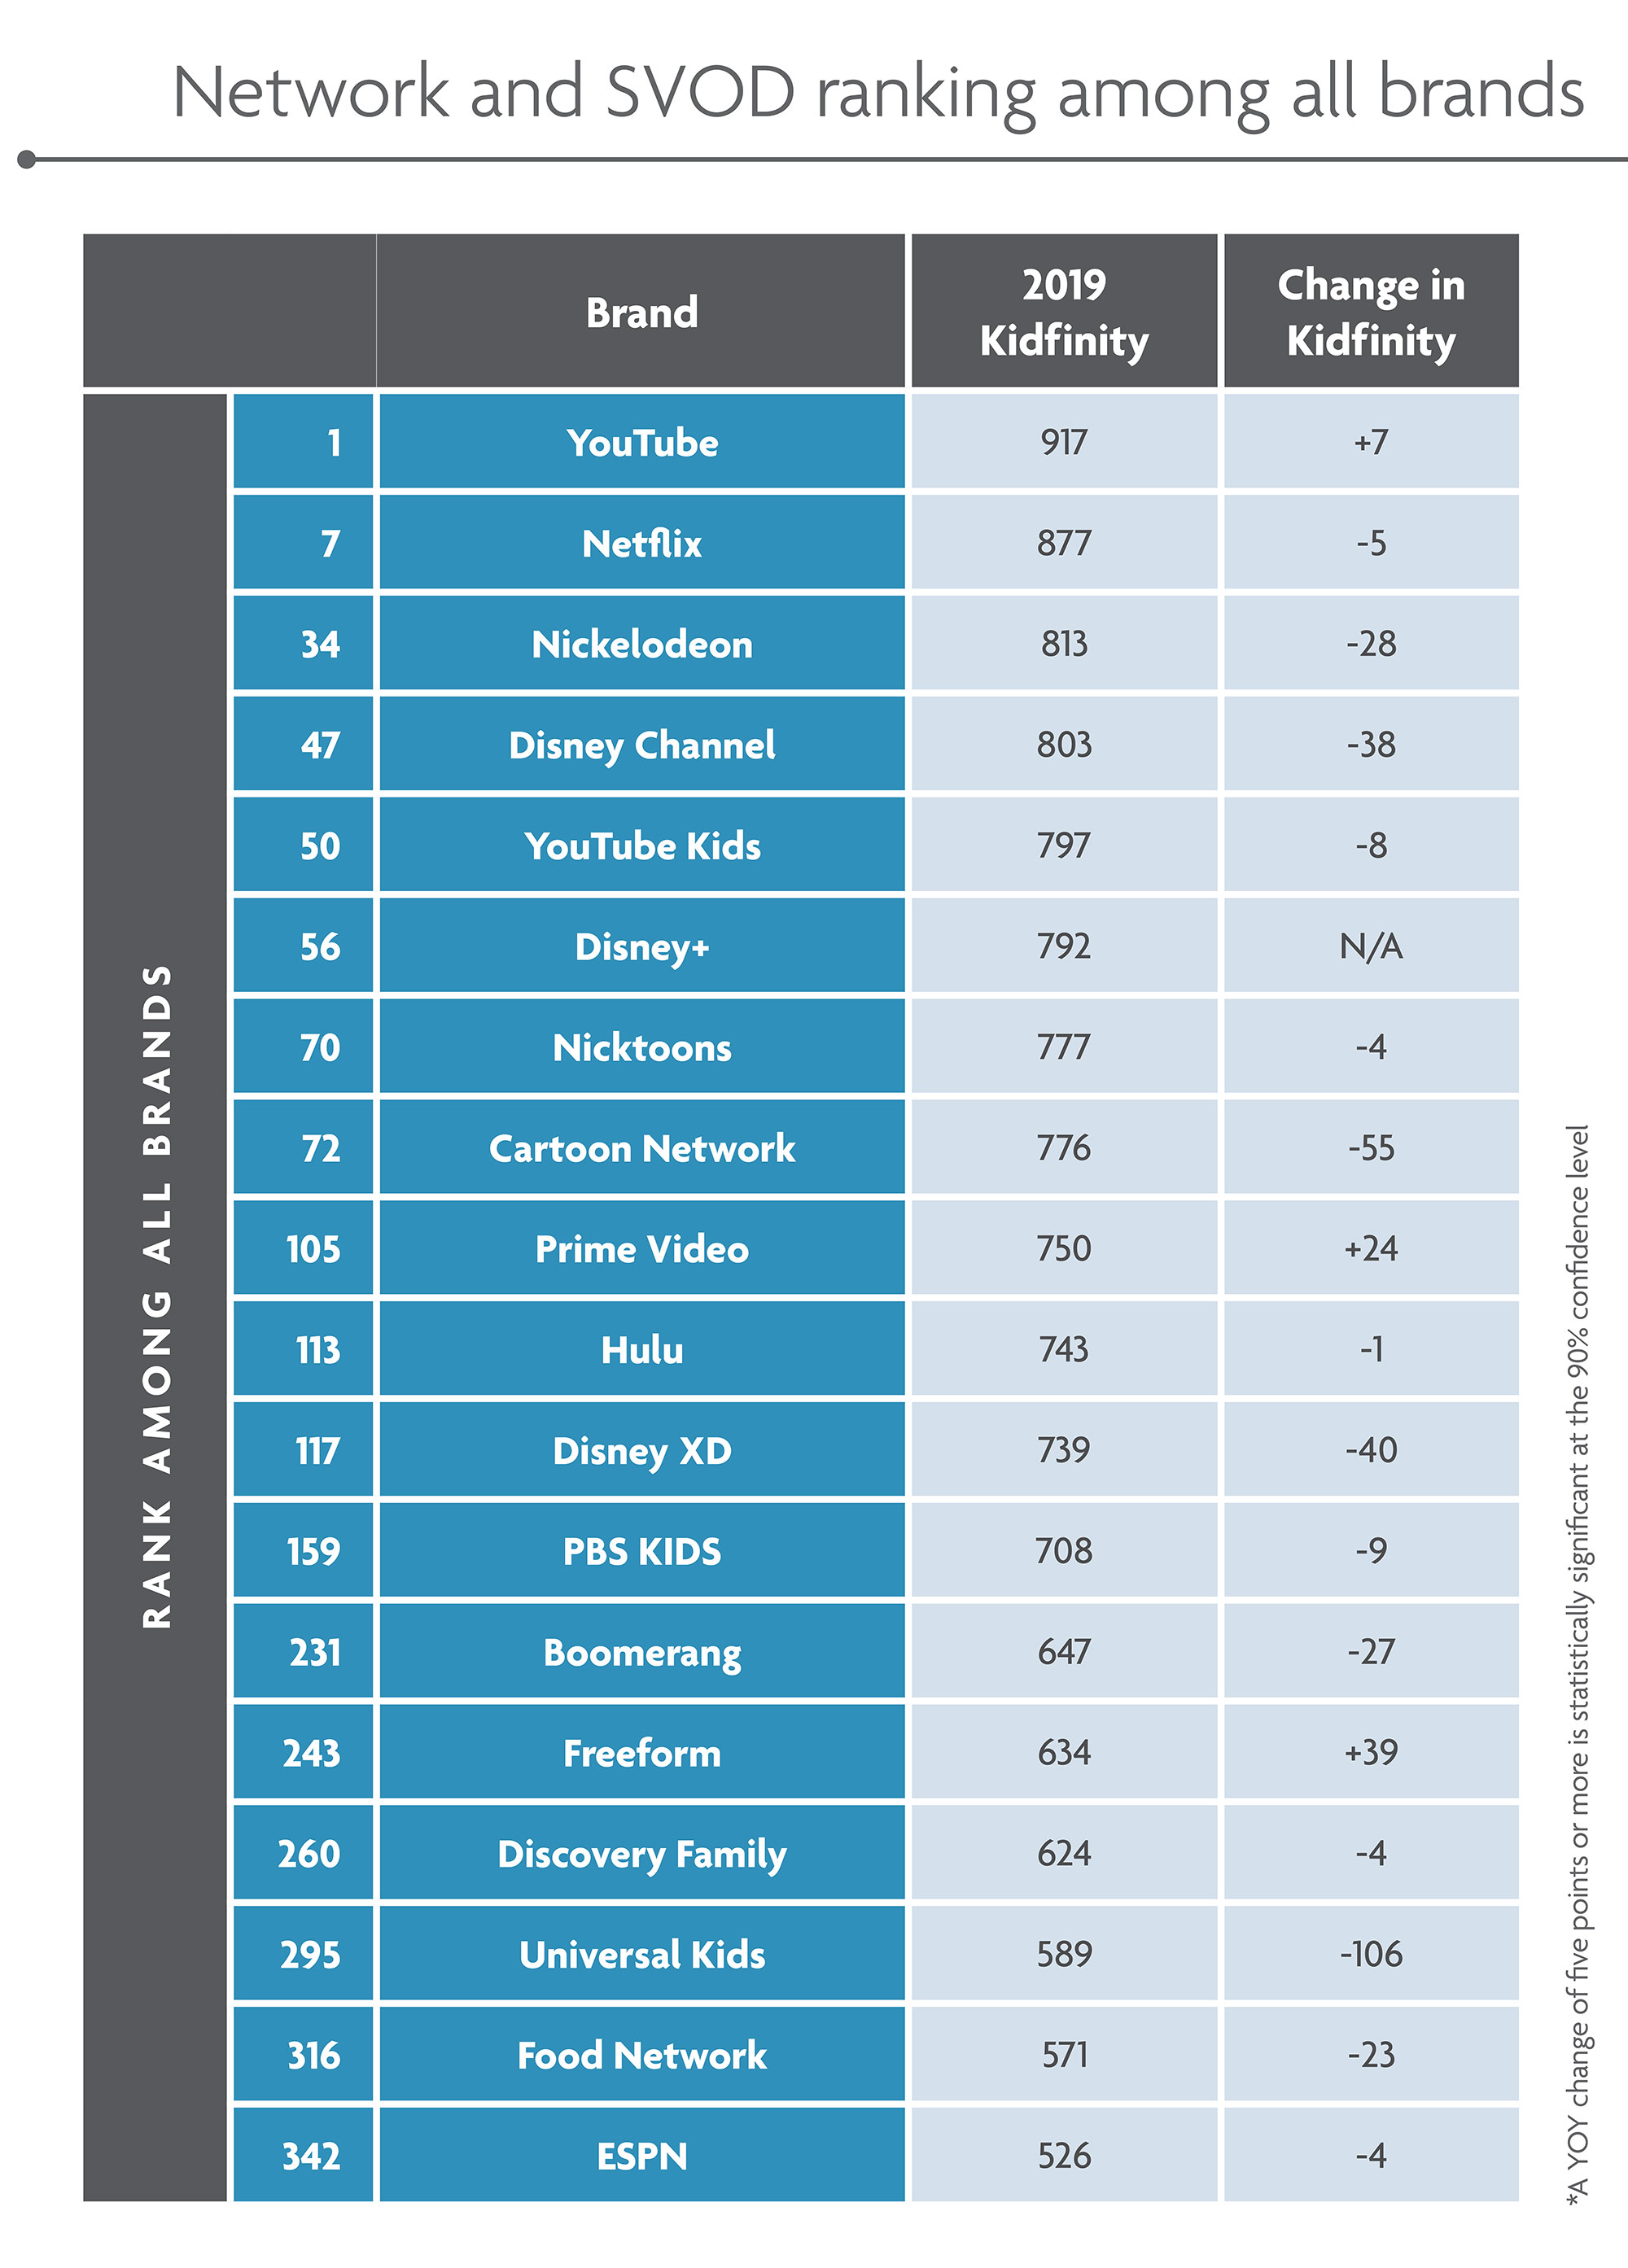 Network and SVOD rankings.